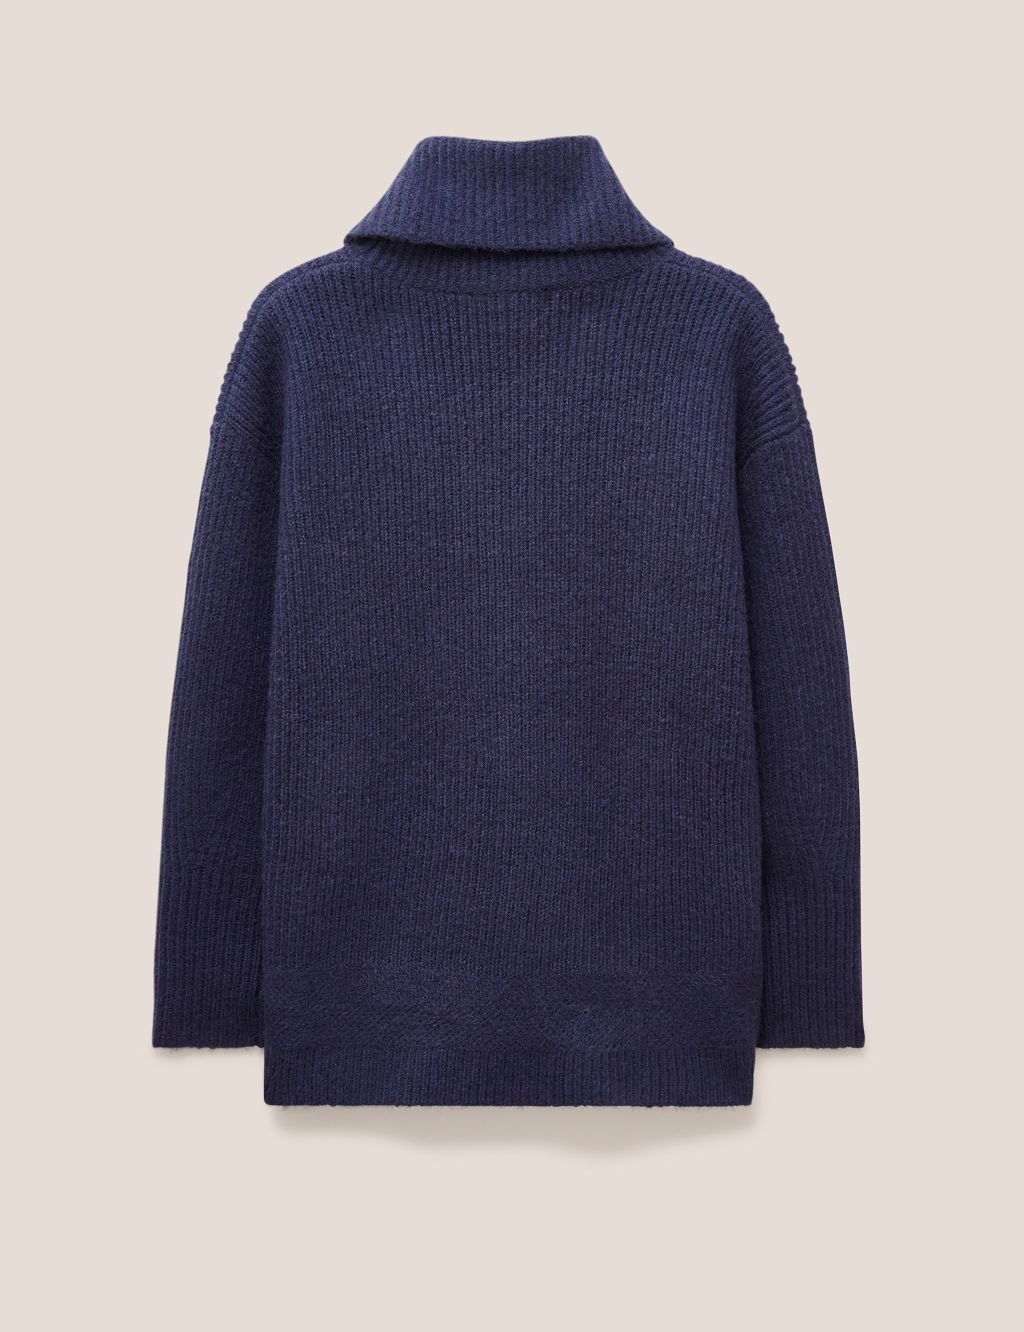 Ribbed Roll Neck Jumper with Wool image 6